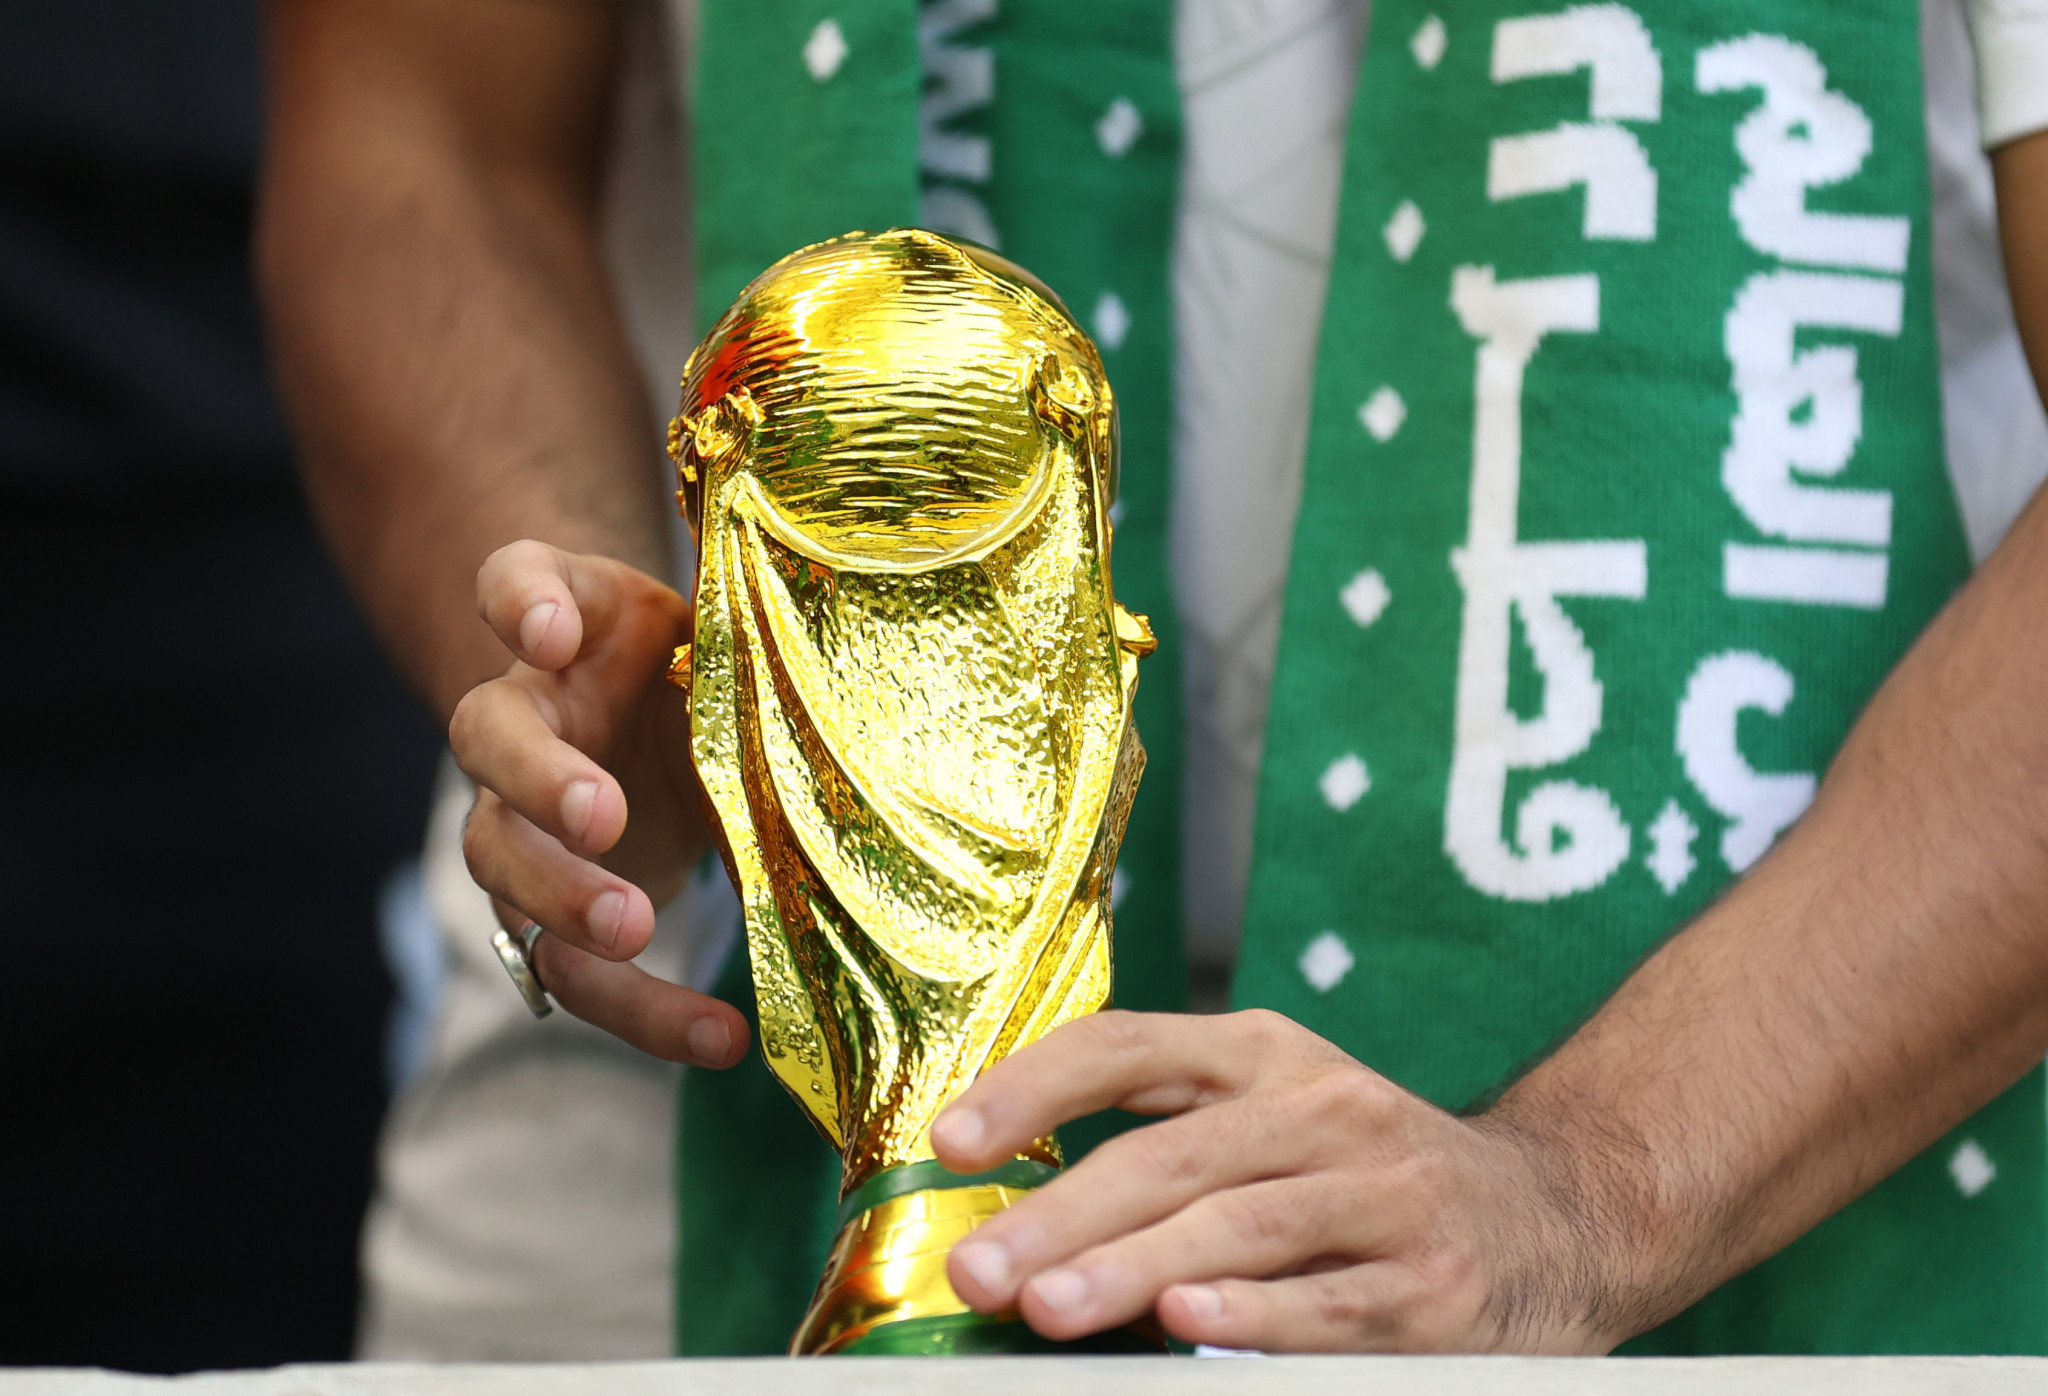 A Saudi-led bid with Egypt and Greece has been mooted for the 2030 FIFA World Cup ©Getty Images